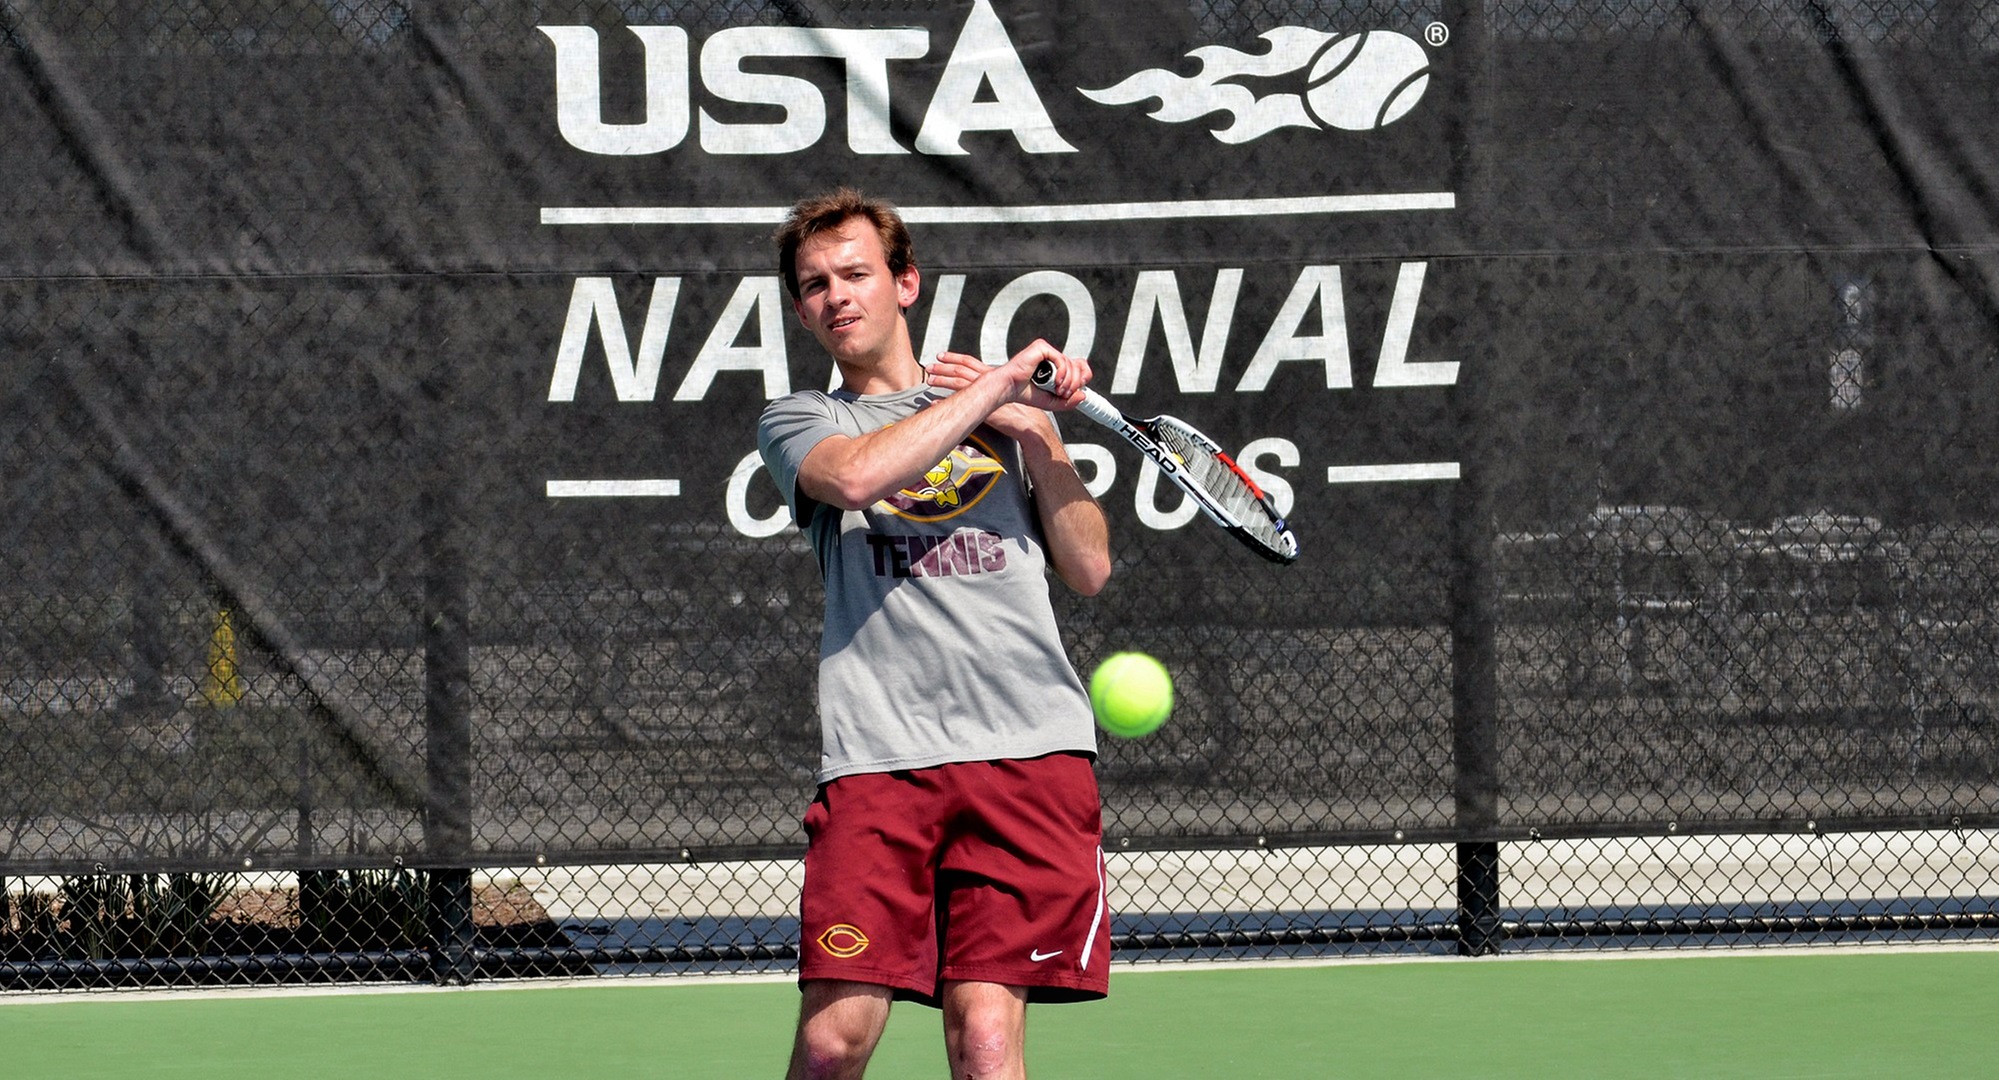 Senior David Youngs hits a forehand during his match at the USTA National Tennis Center. Youngs won his team-leading eighth singles match on Thursday.  (Photo courtesy of Jeff Meyer)